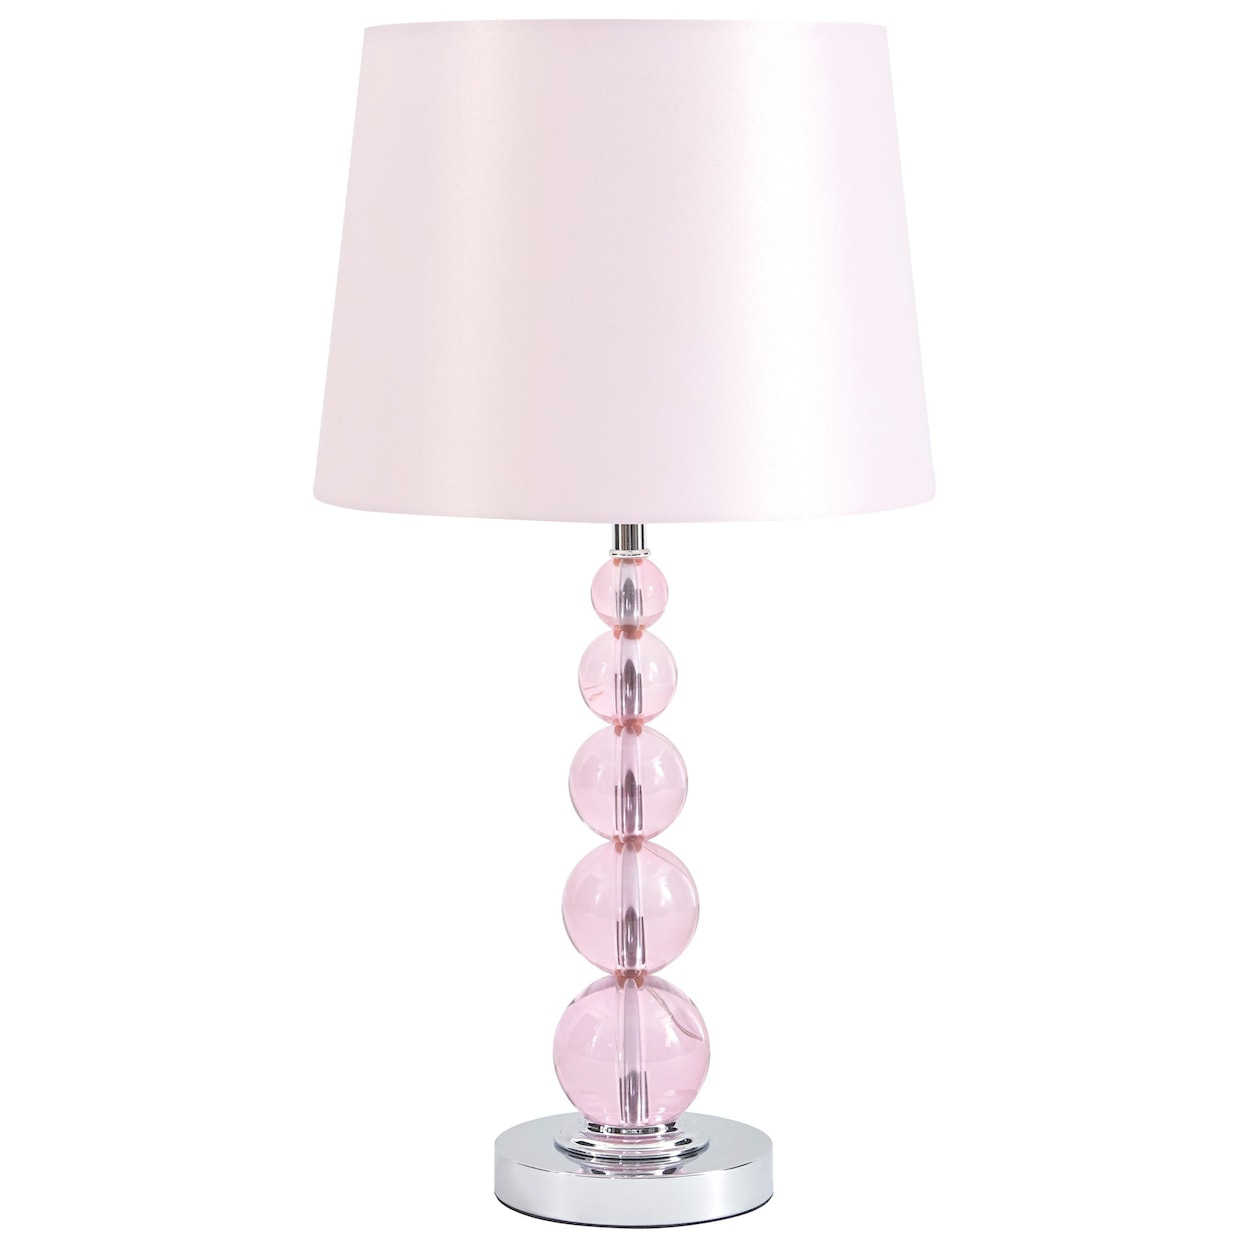 Ashley Furniture Signature Design Lamps - Contemporary Letty Pink Table Lamp